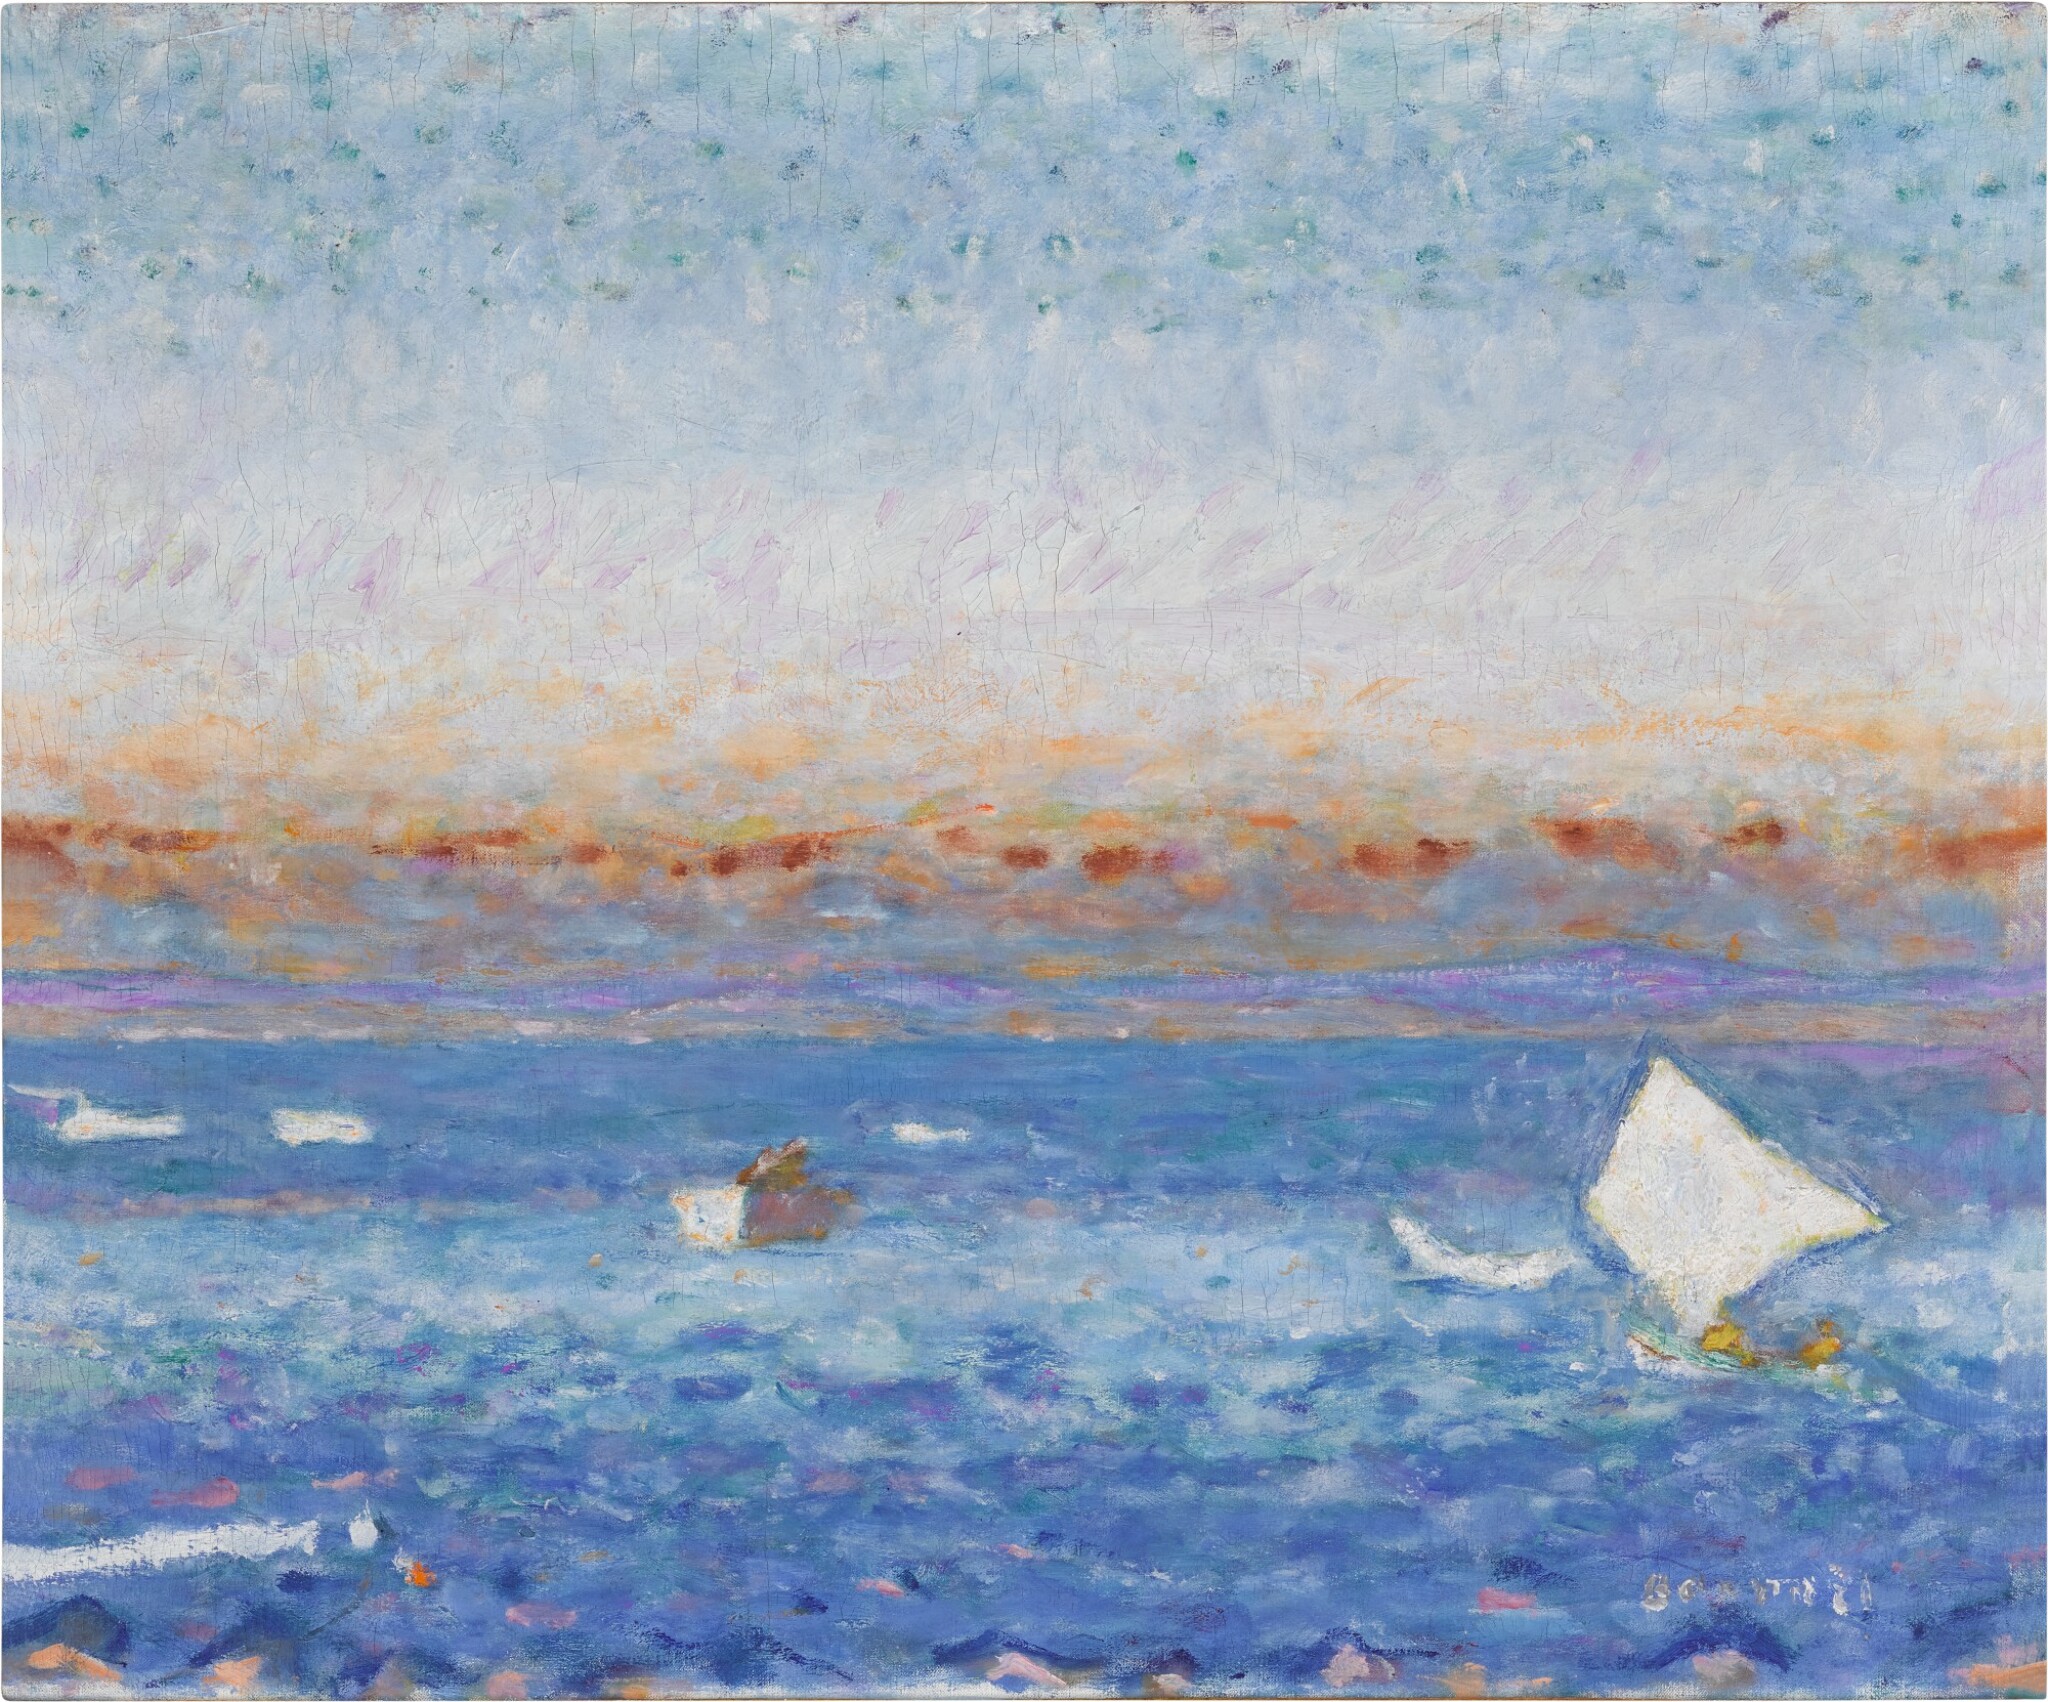 Matinée in Arcachon by Pierre Bonnard - c. 1930 - 55.4 x 65.4 cm private collection